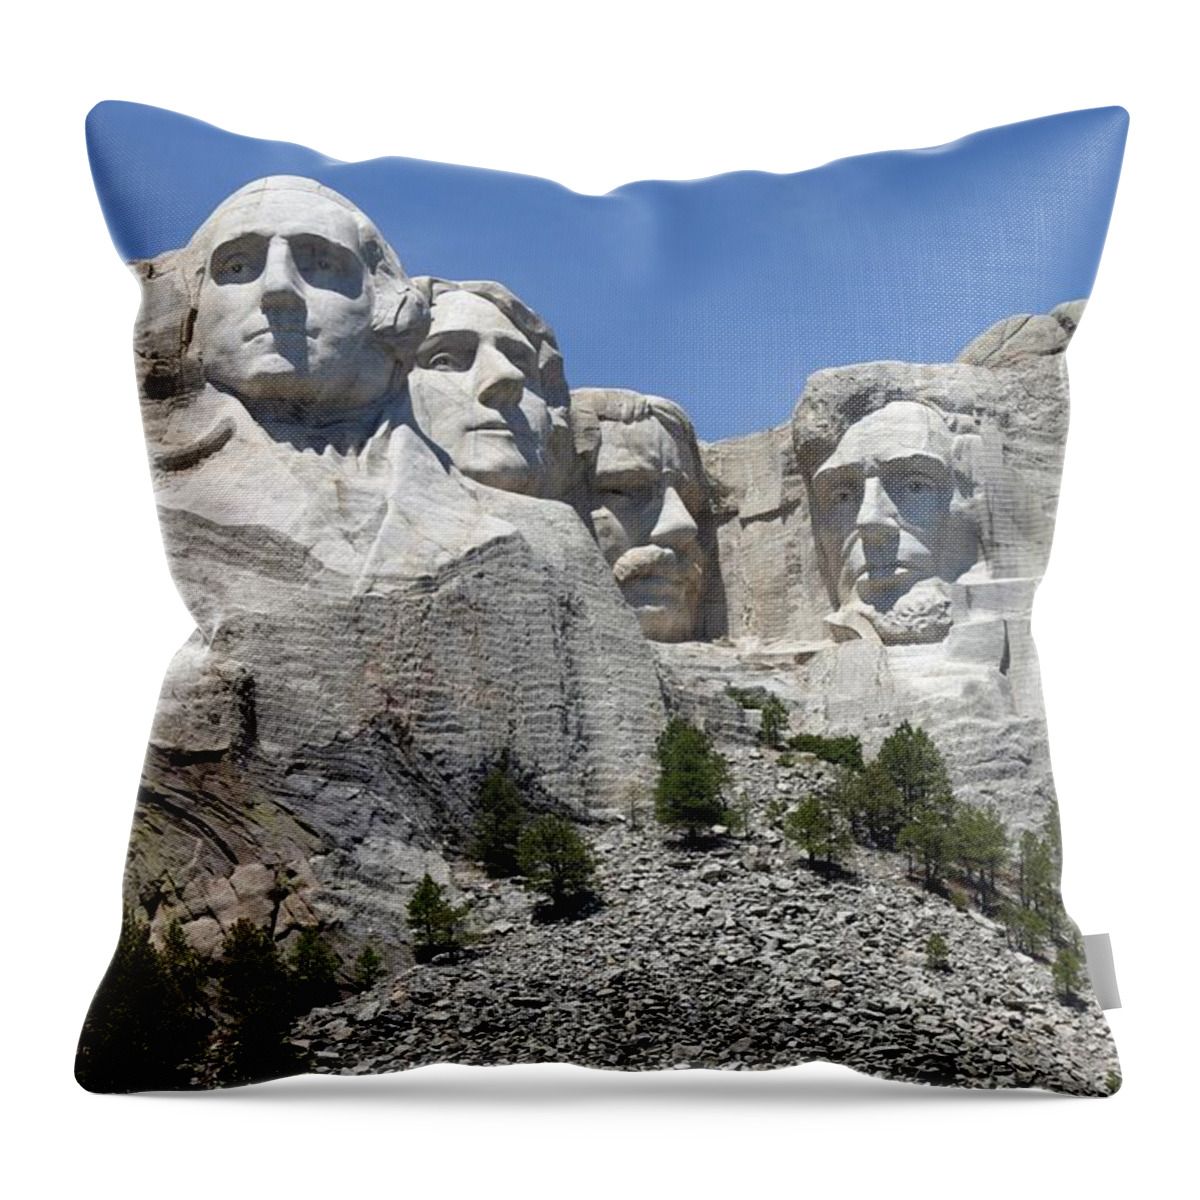 Mount Rushmore Throw Pillow featuring the photograph Mount Rushmore Vertical by Living Color Photography Lorraine Lynch